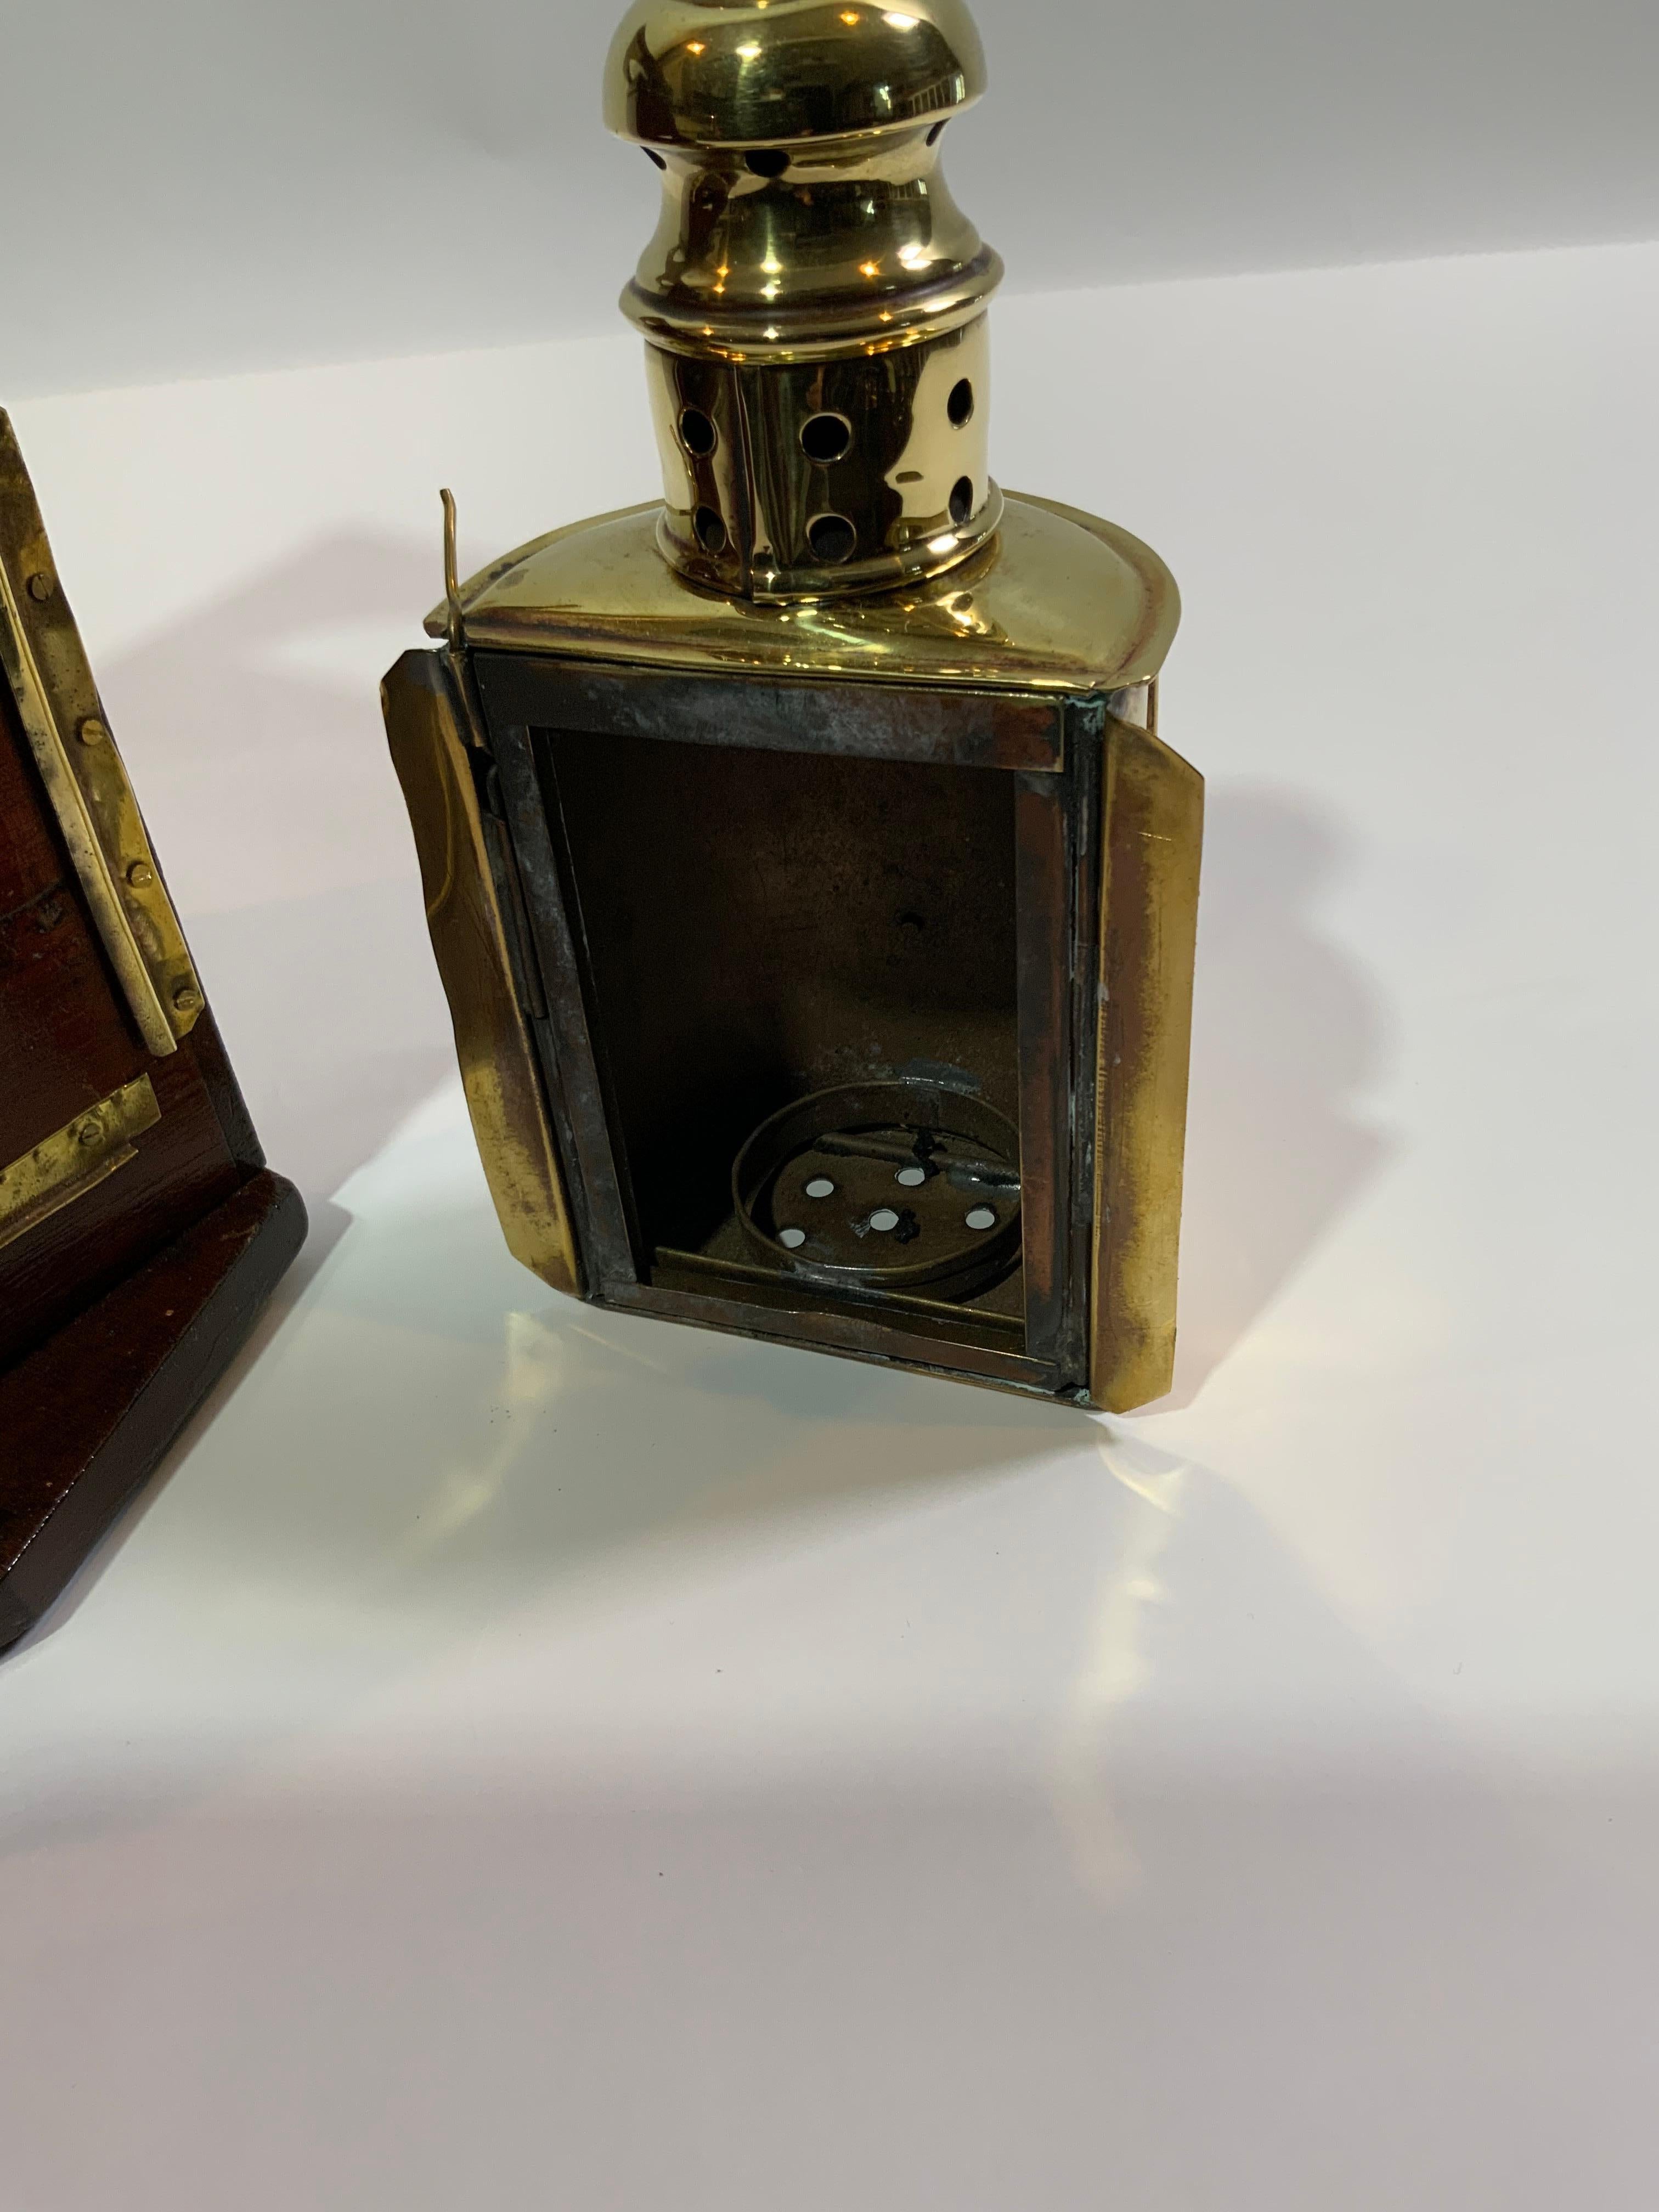 Antique Yacht Or Boat Binnacle Compass by Polaris In Good Condition For Sale In Norwell, MA